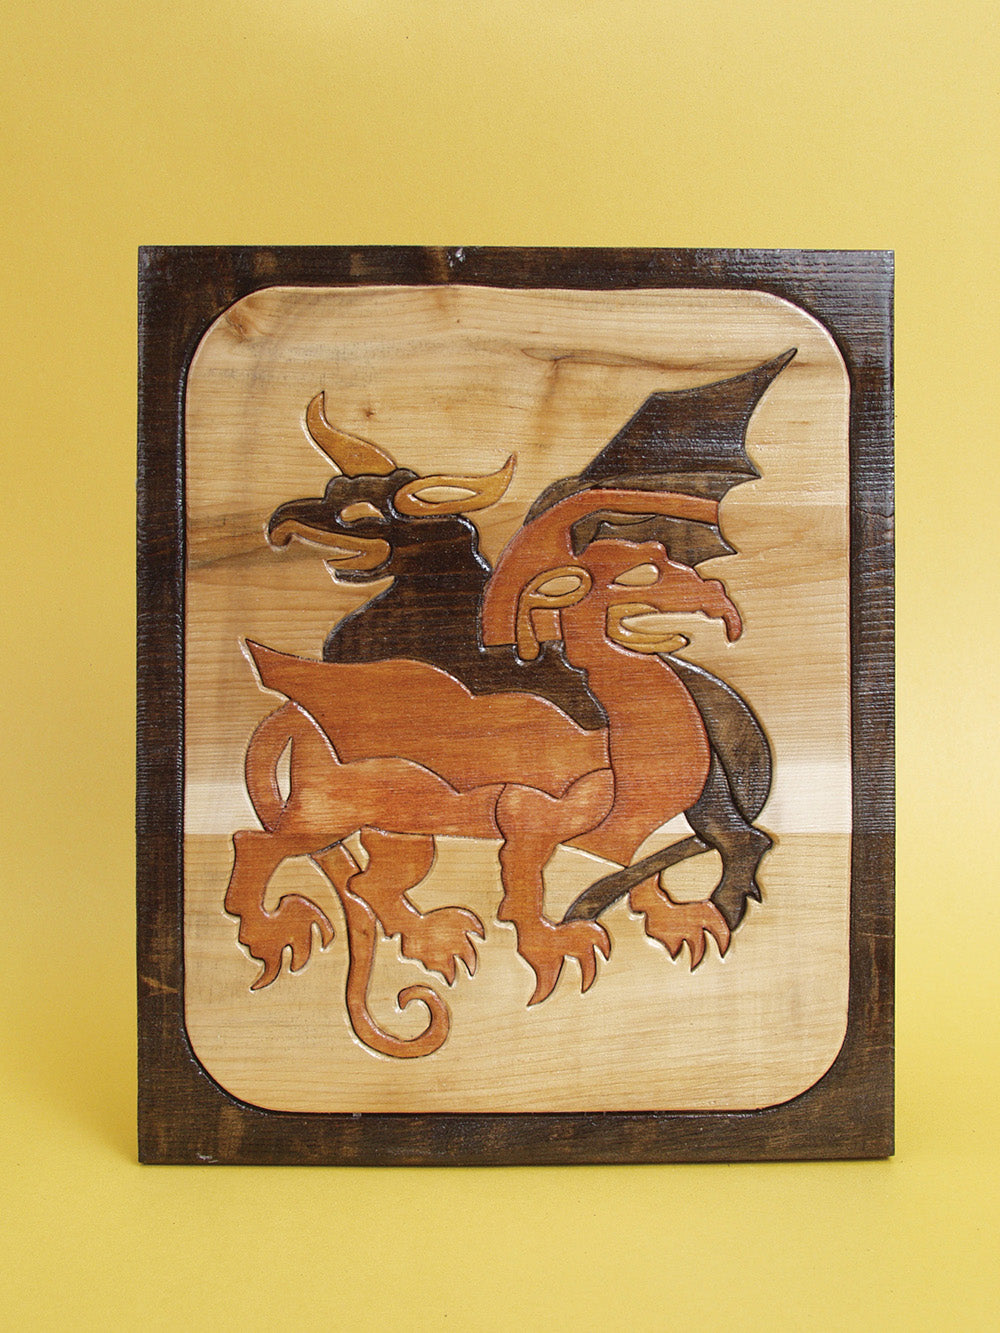 Fantasy & Medieval Mosaics for the Scroll Saw